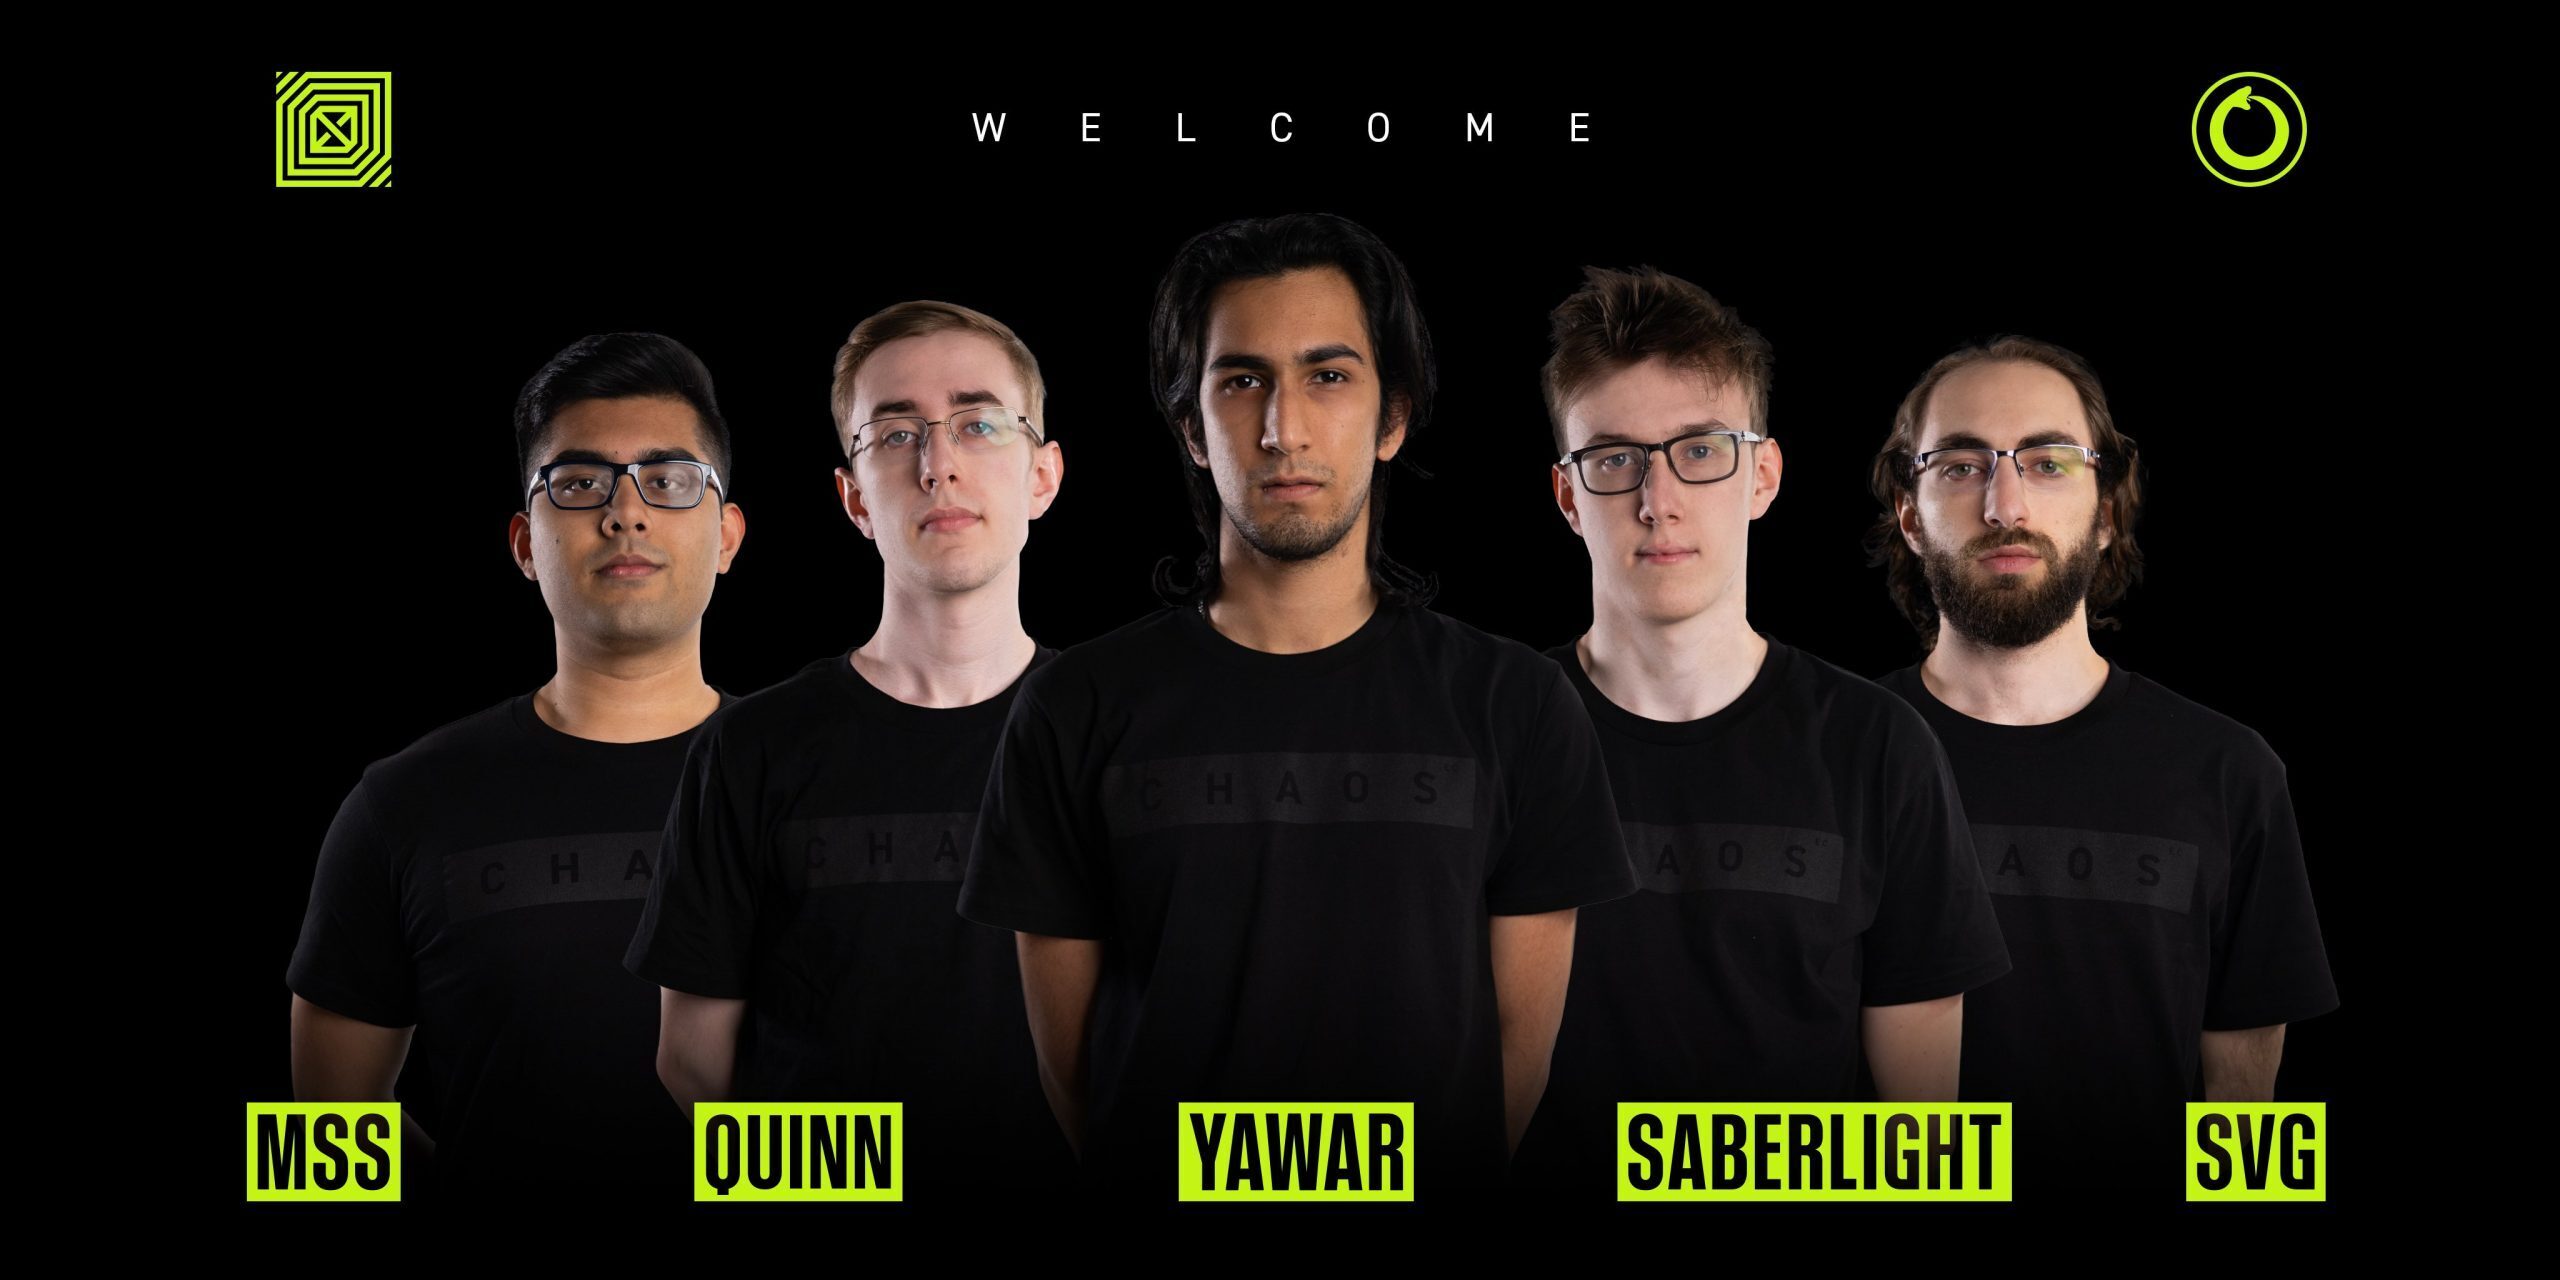 CCnC, Yawar, MSS and SVG form the new nucleus of Chaos Esports Club (Image via Chaos Esports Club/Twitter)